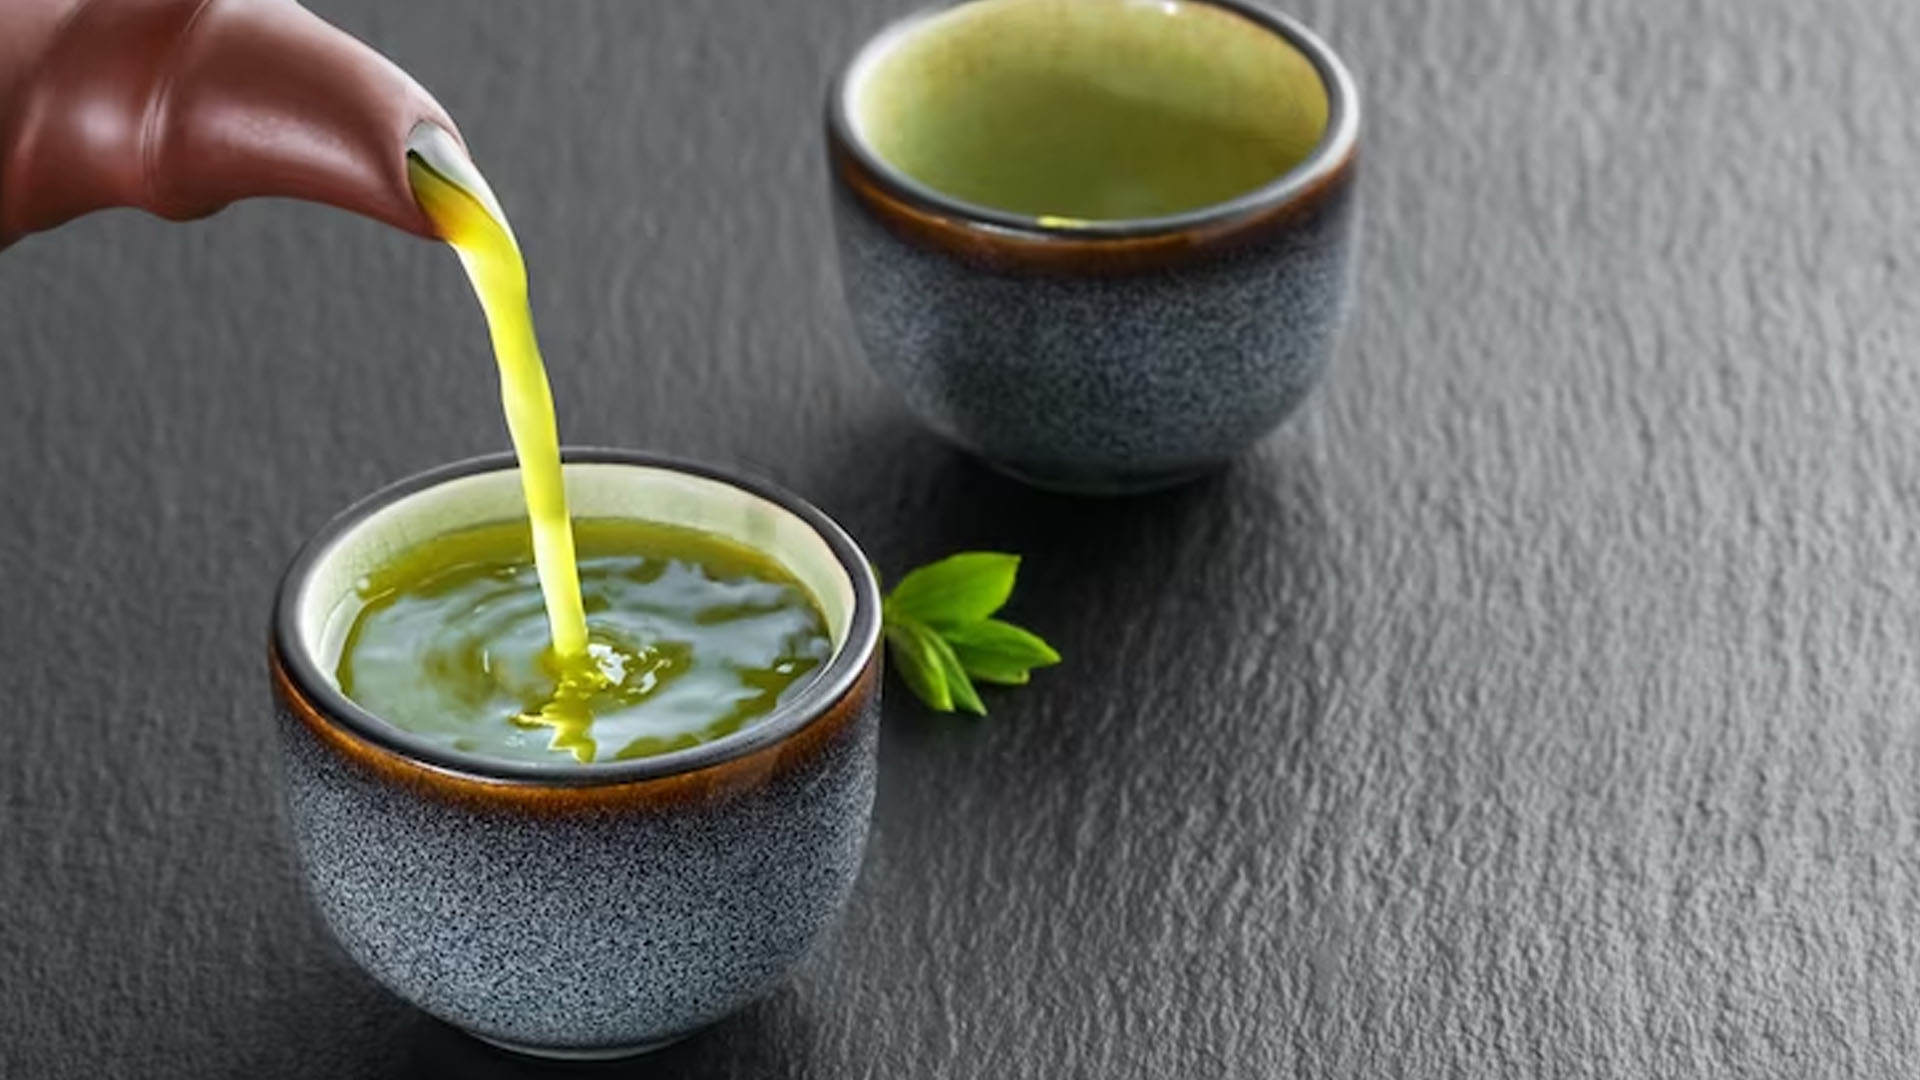 Is There Any Health Benefit Consuming Green Tea After Food?